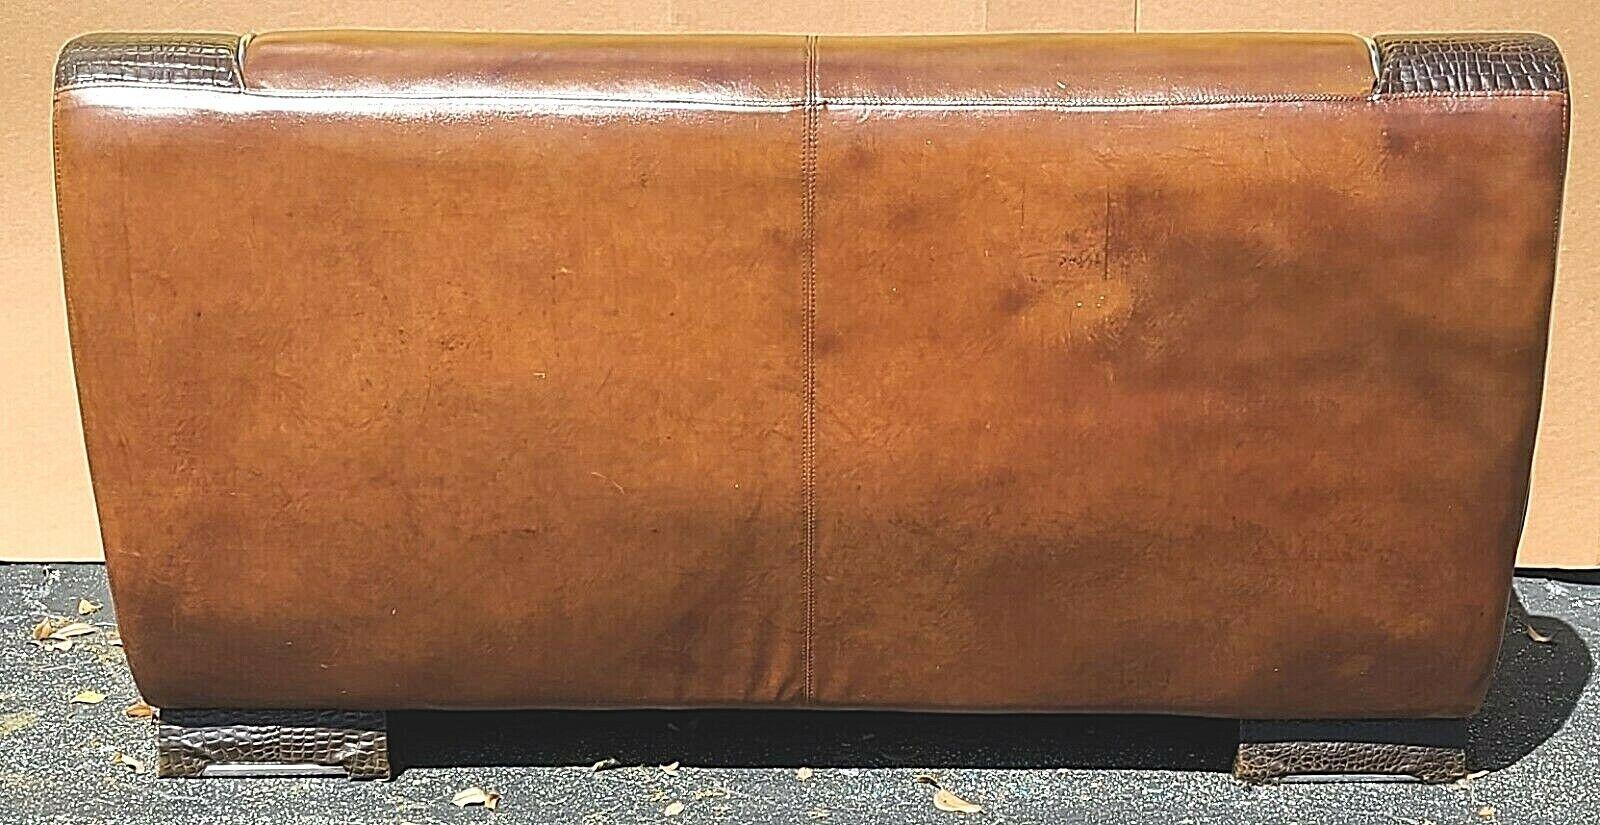 Hand-Crafted Italian Leather & Alligator Skin Settee 1970s Custom Made For Sale